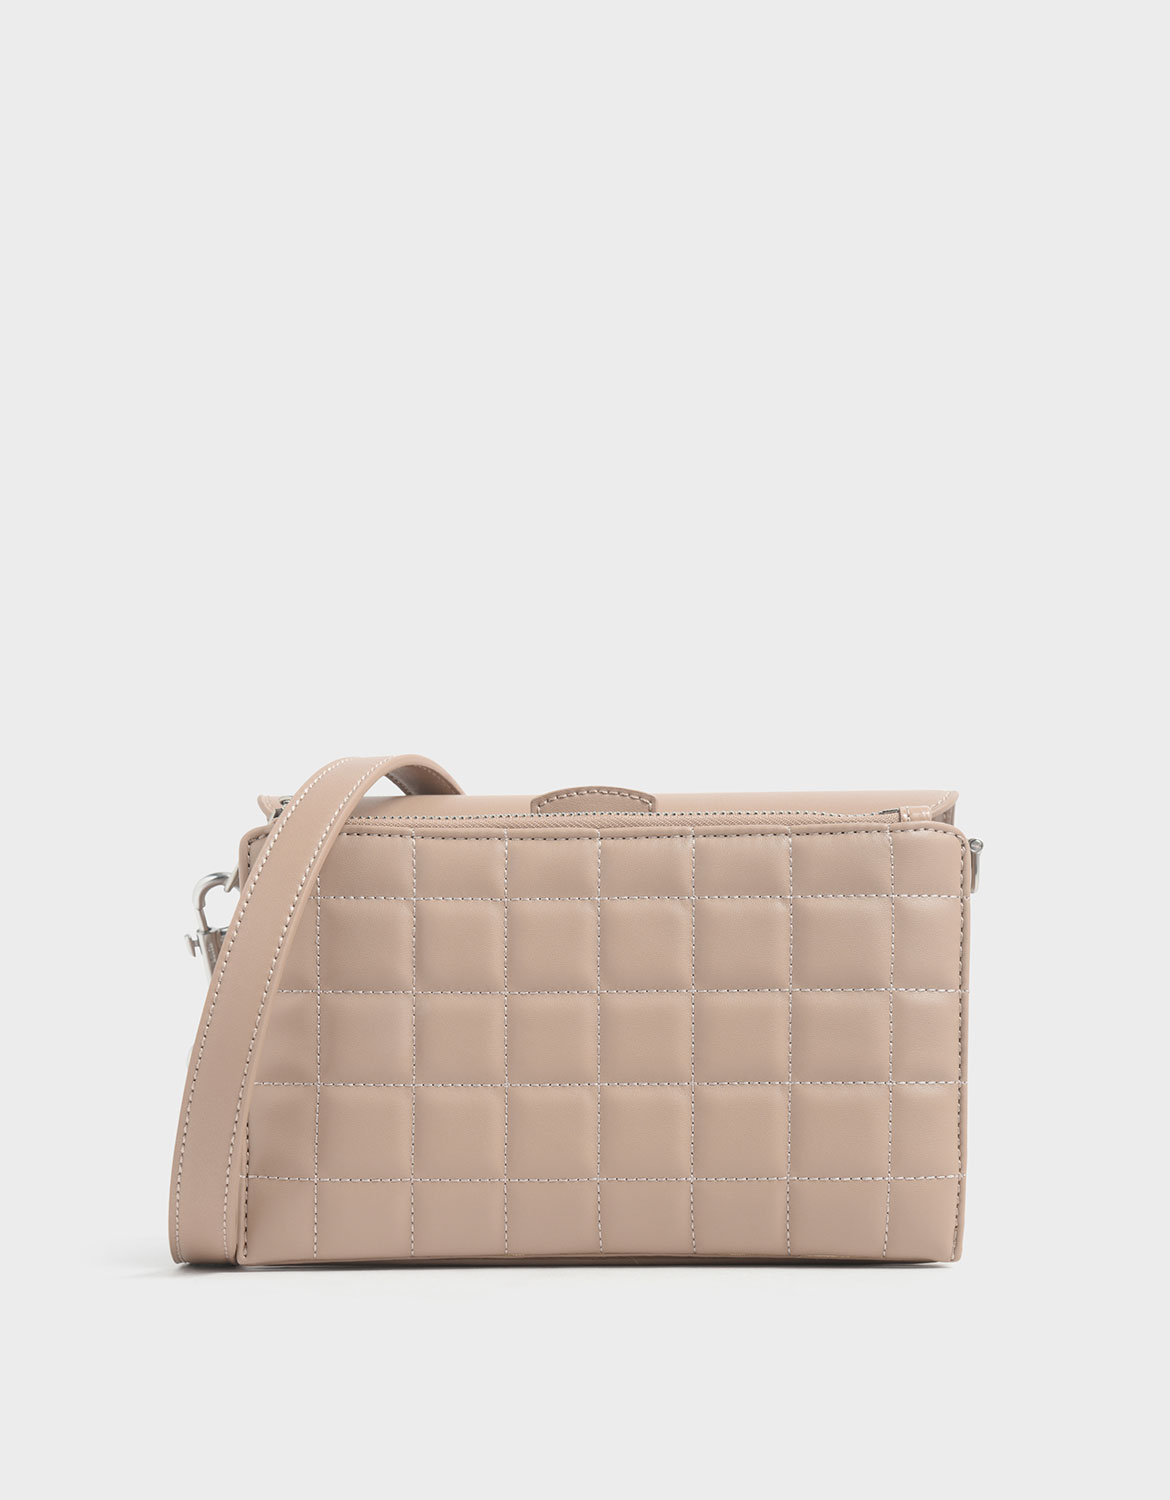 Women's Removable Quilted Pouch Boxy Shoulder Bag in beige - CHARLES & KEITH